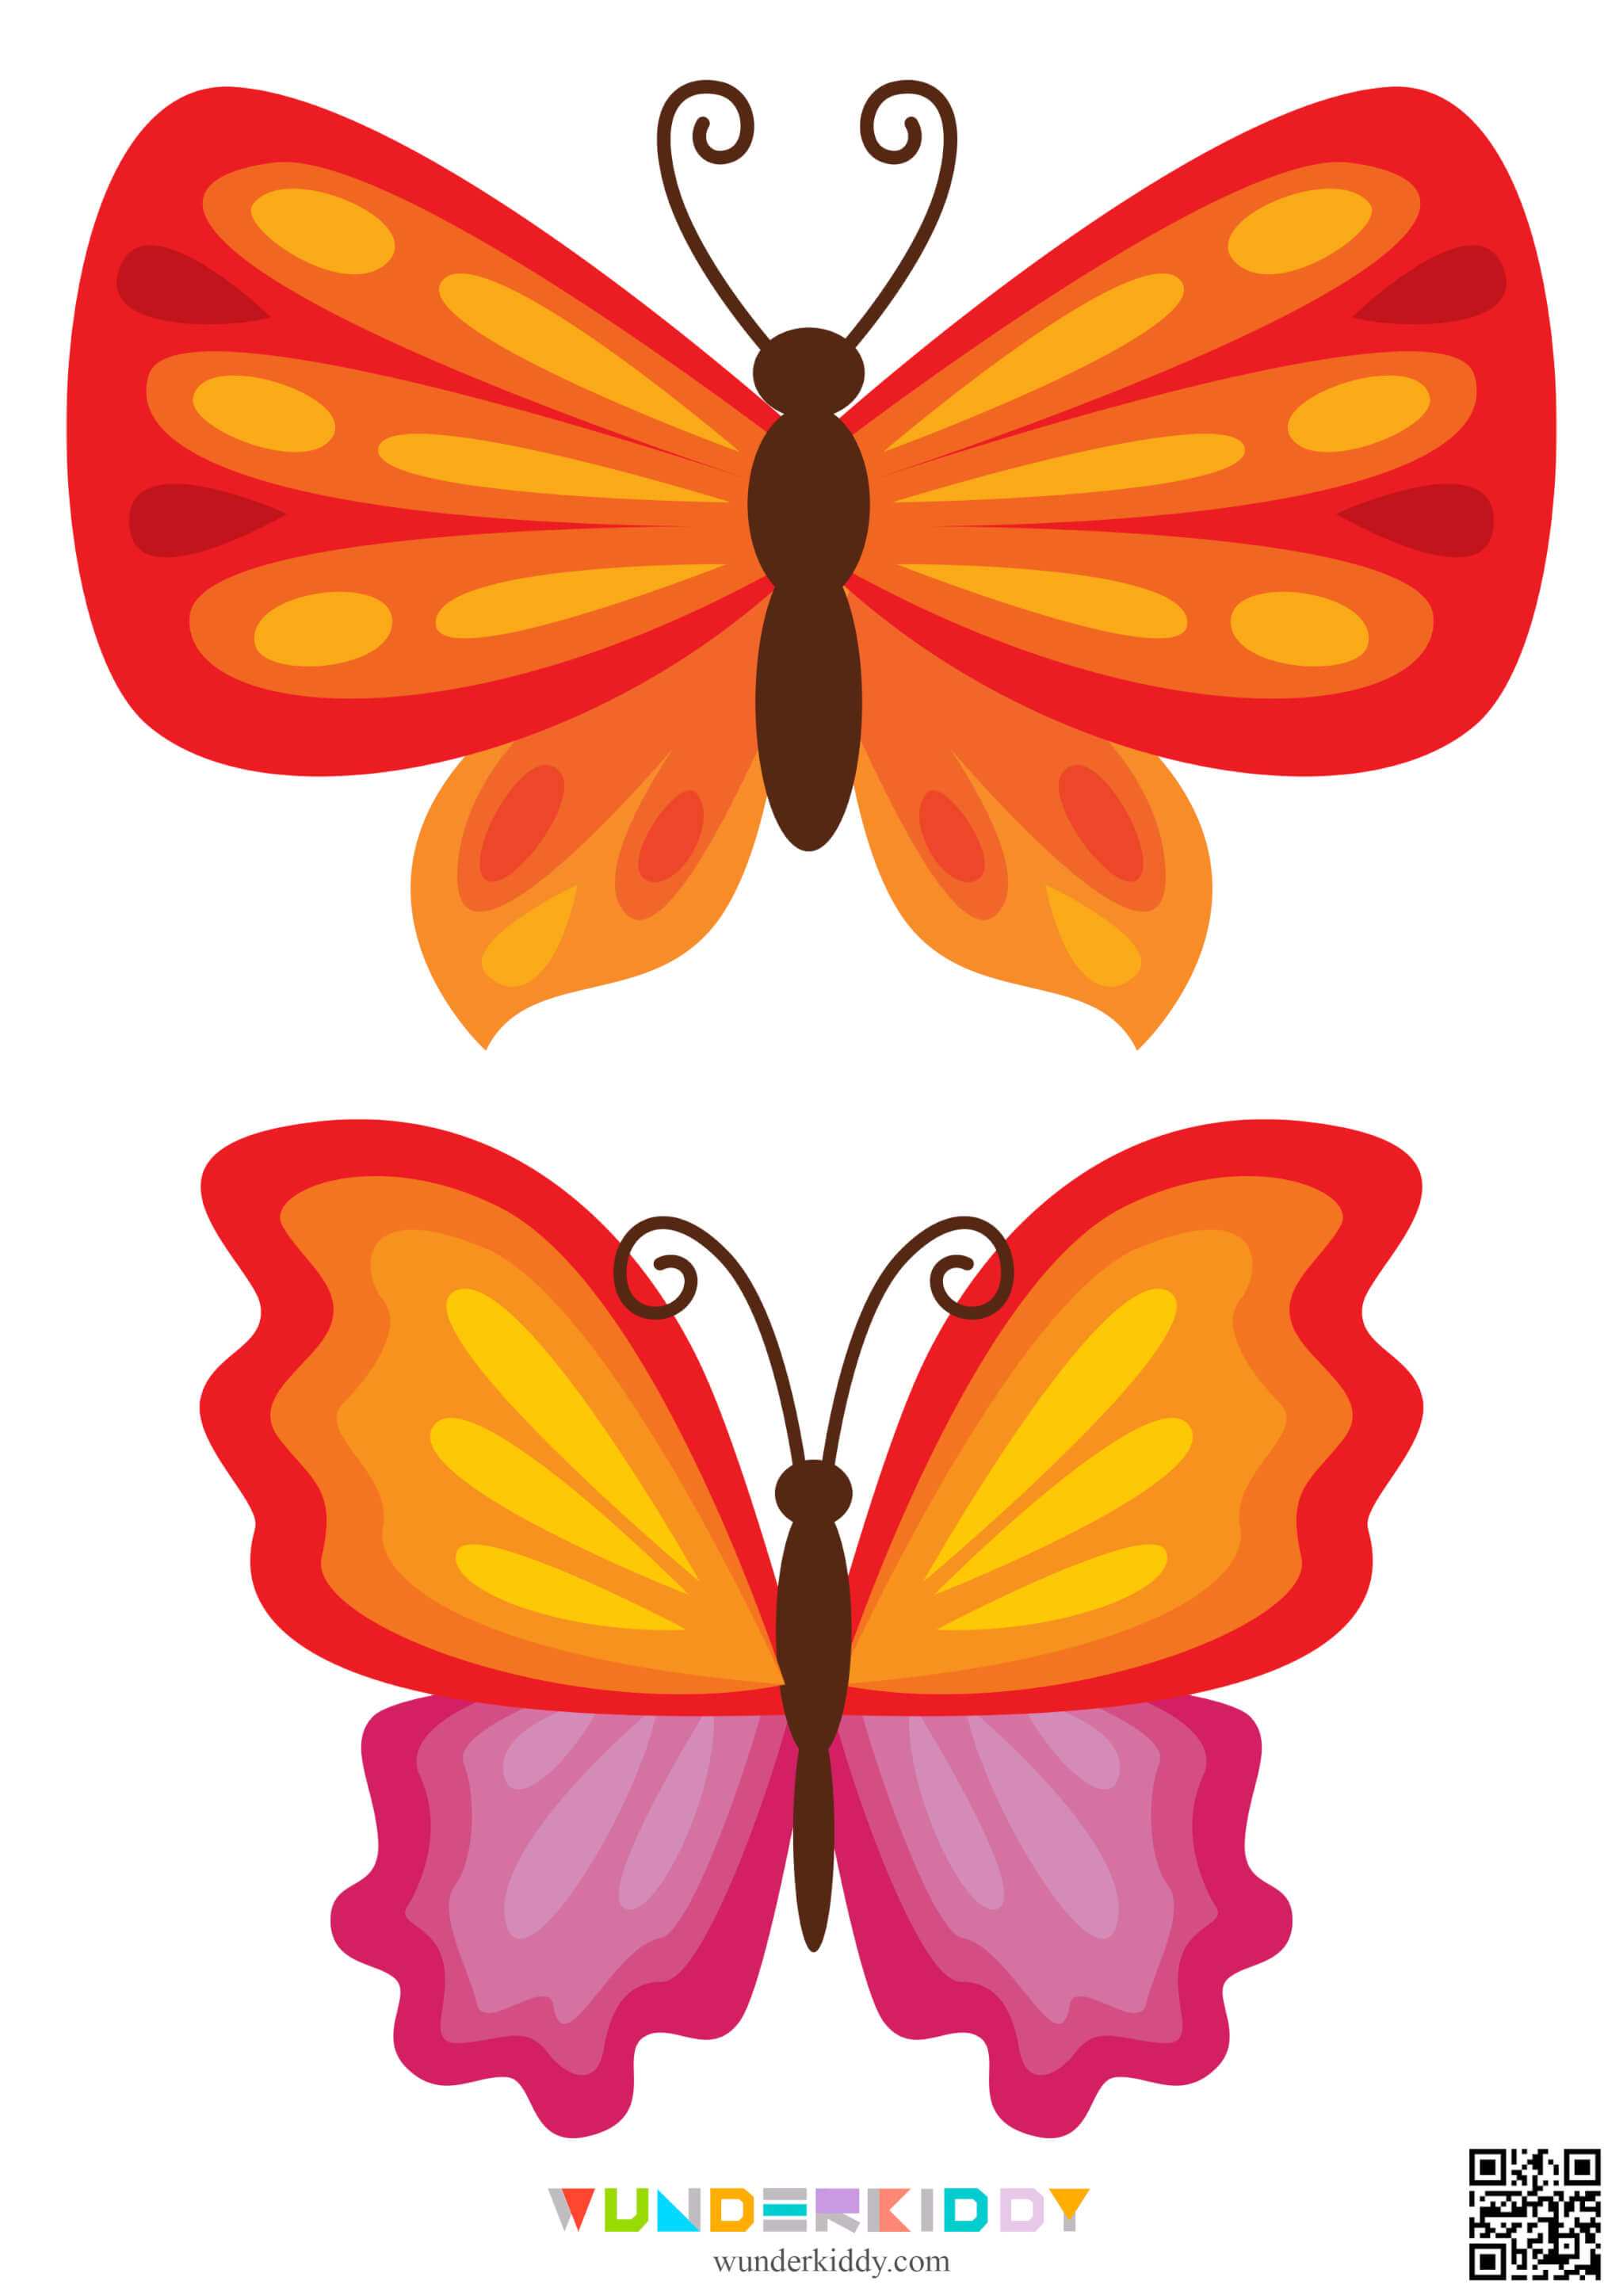 Template «Butterfly» - Image 4